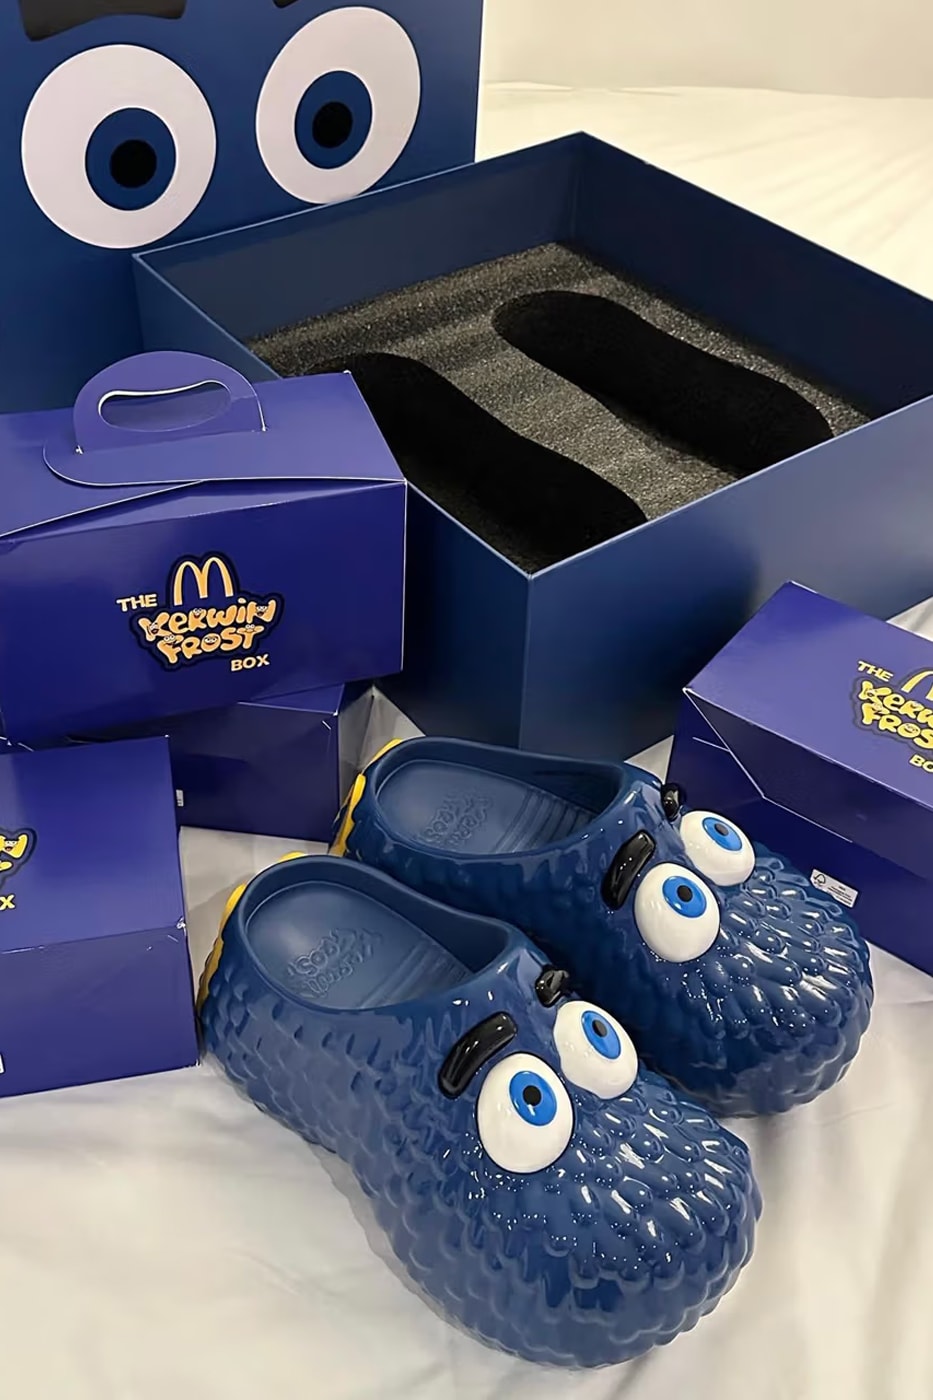 kerwin frost mcdonalds fry guy clogs shoes blue collaboration official release date info photos price store list buying guide